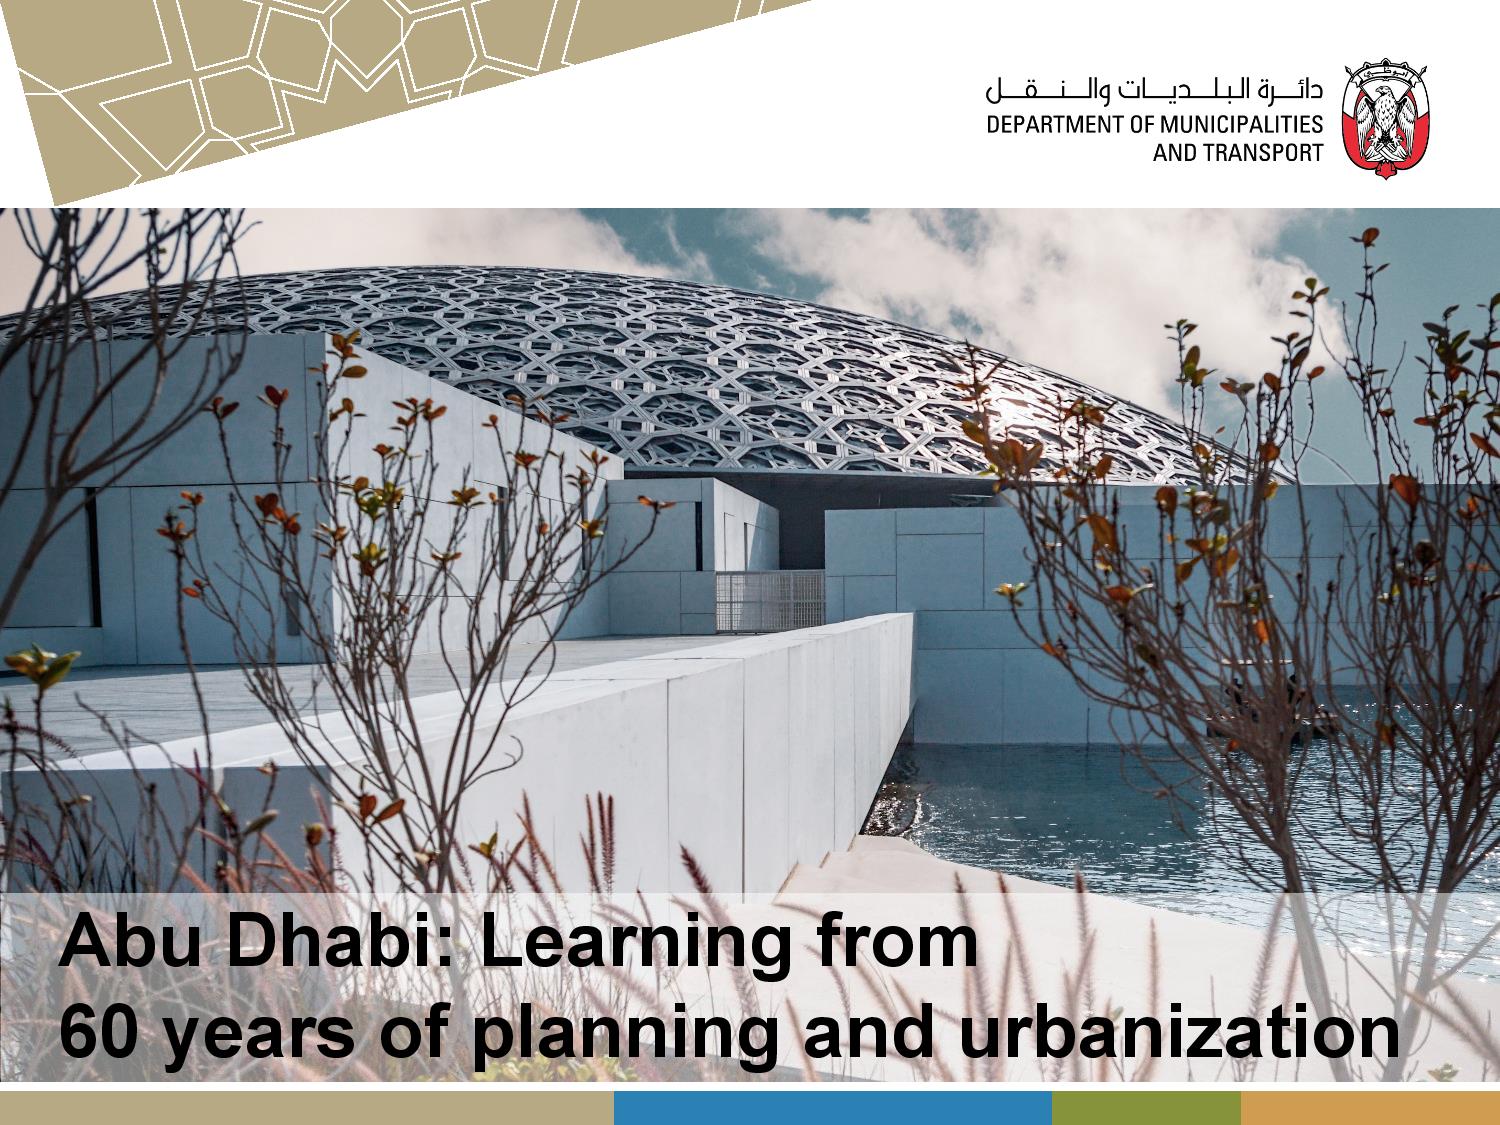 2nd Spatial Planning Platform (SPP) Meeting: Part I – Abu Dhabi: Learning from 60 years of planning and urbanisation